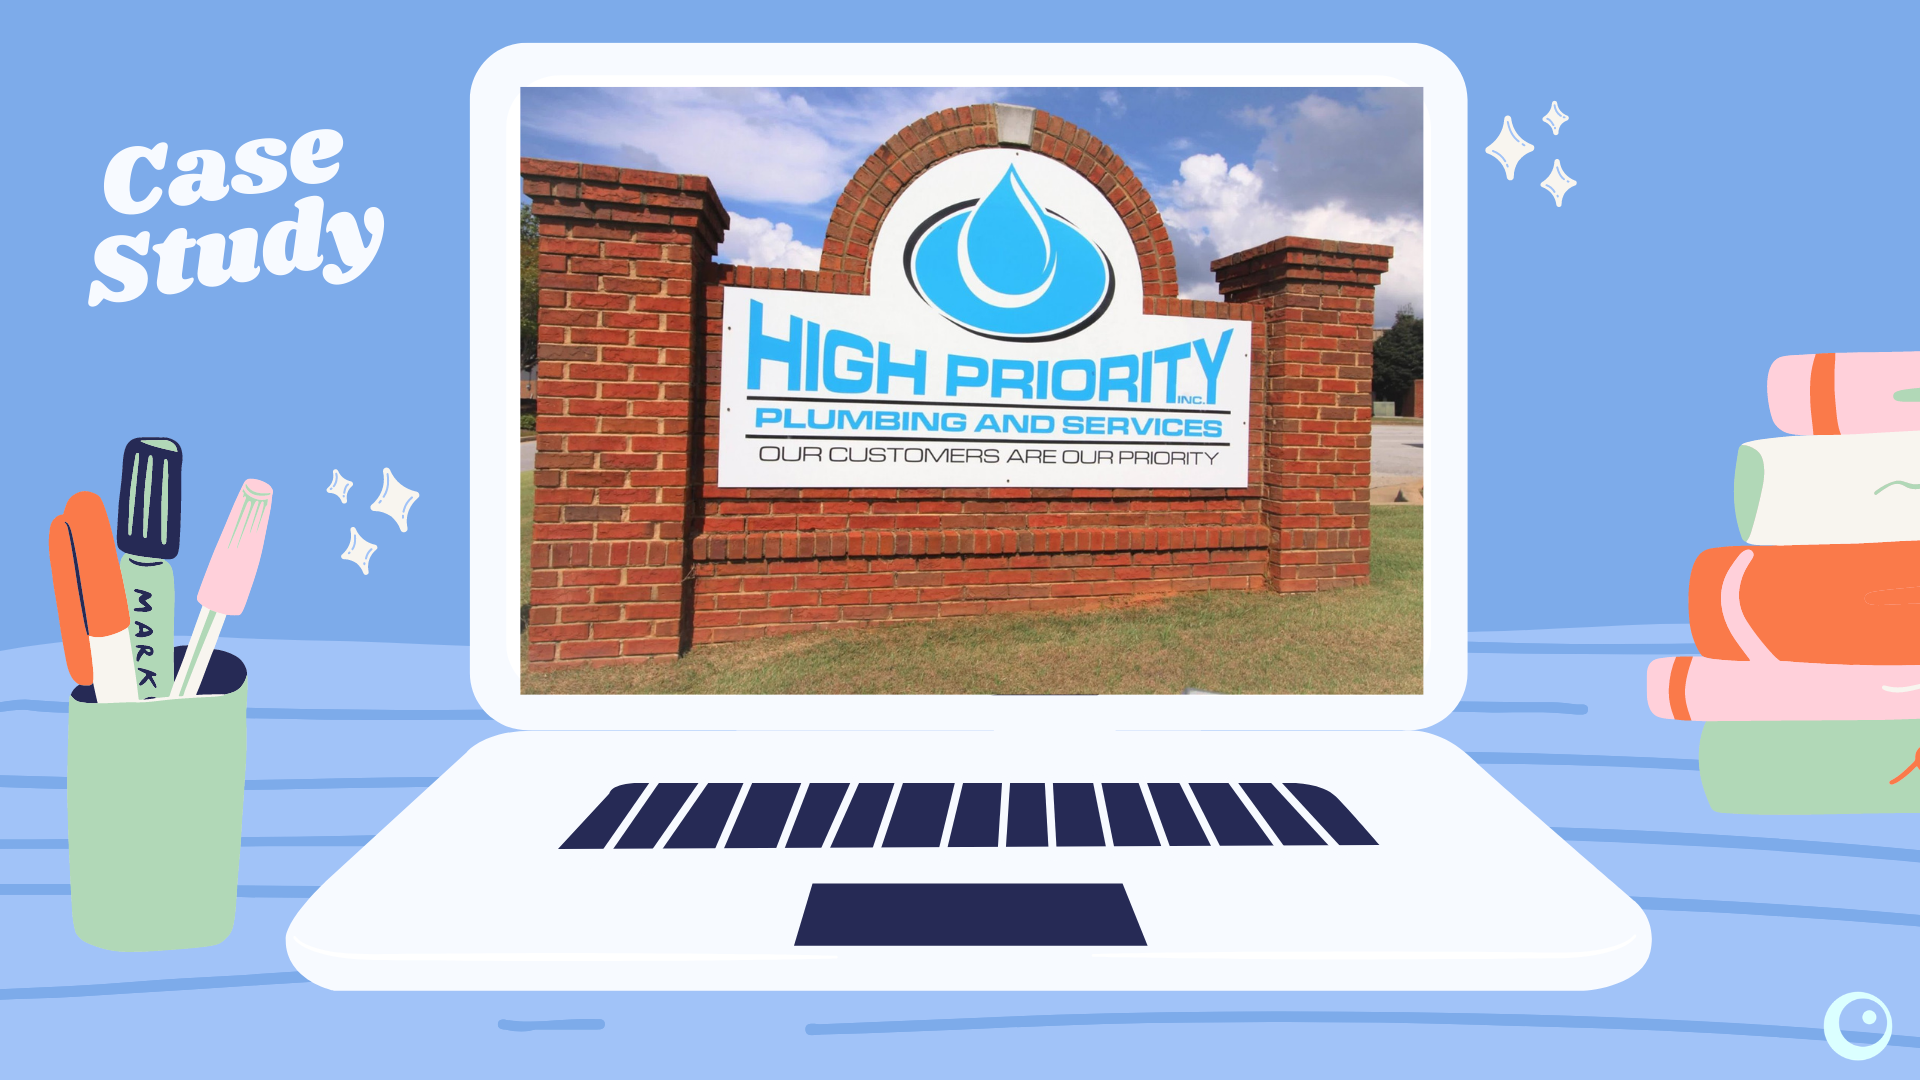 Case study graphic about High Priority Plumbing in Metro Atlanta